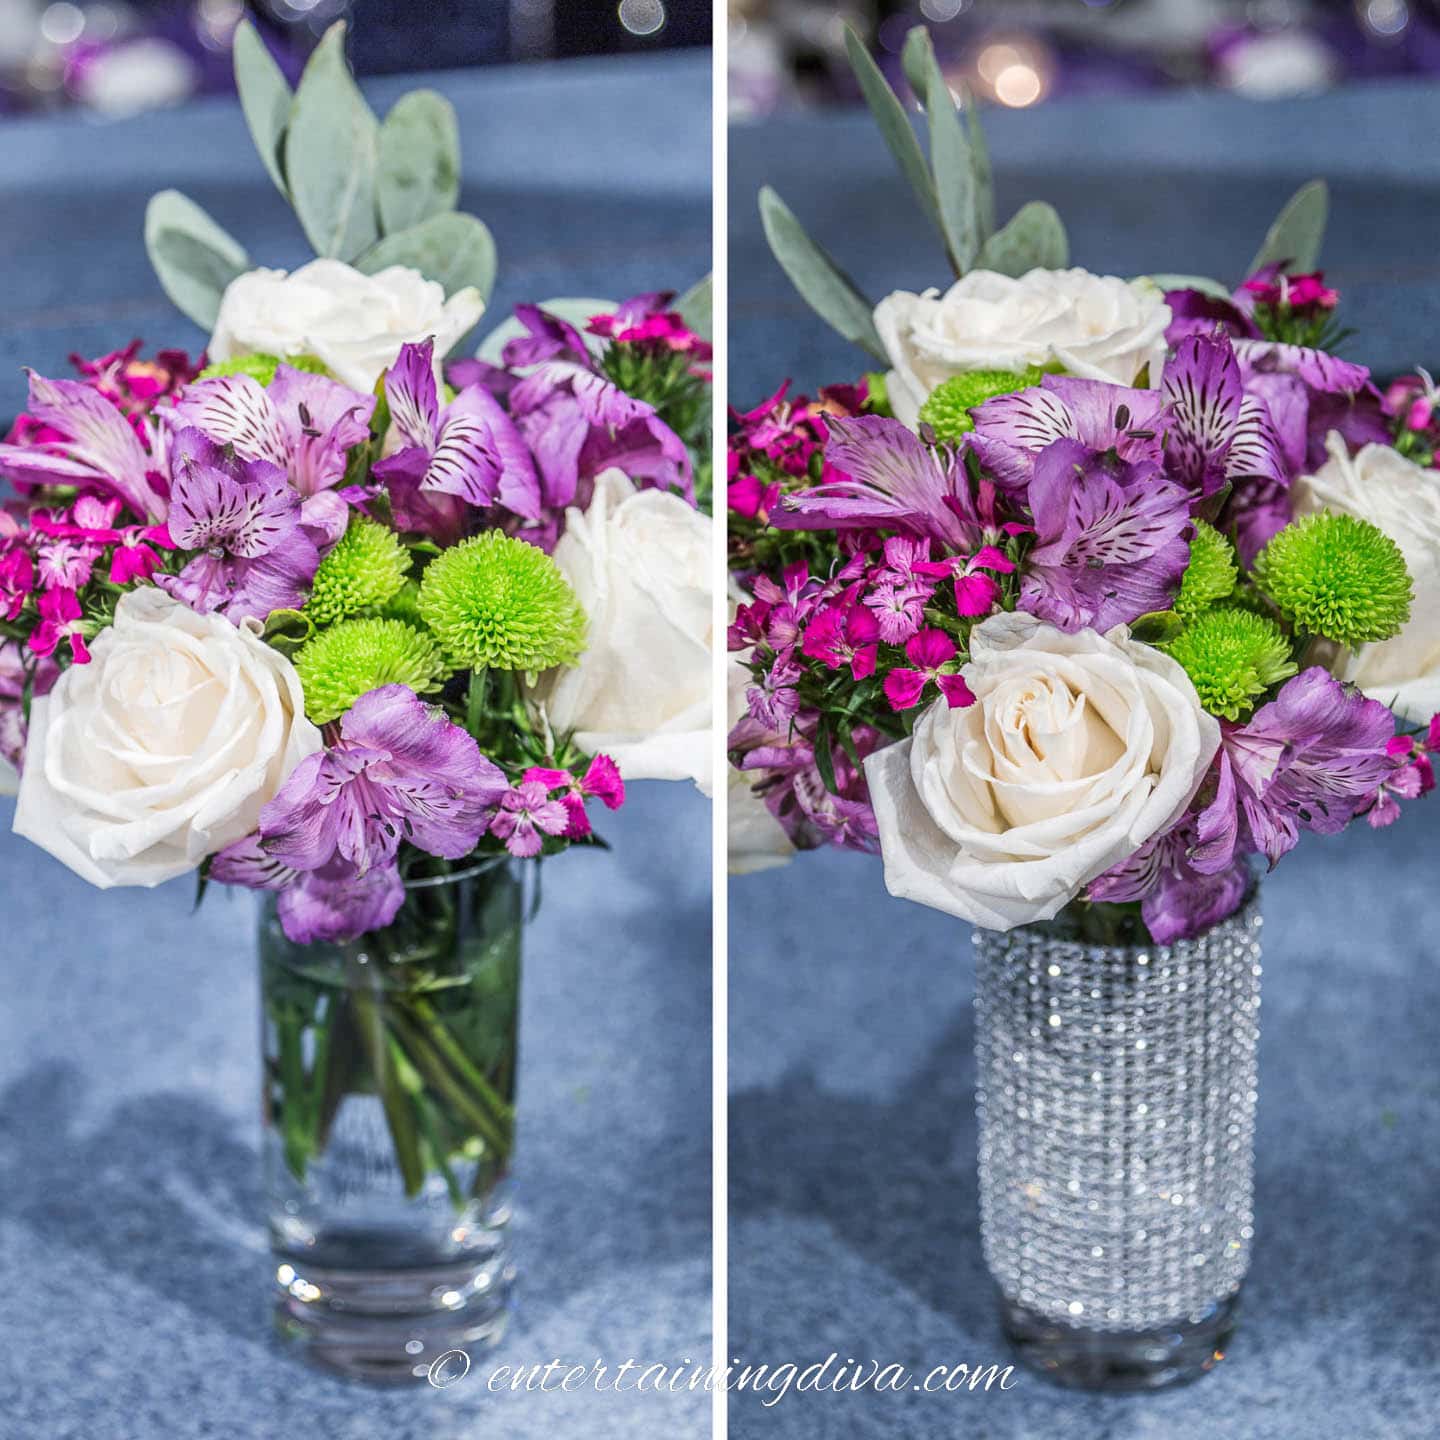 Small flower arrangement in a tall drinking glass with and without a wide ribbon wrapped around the bottom to cover the stems